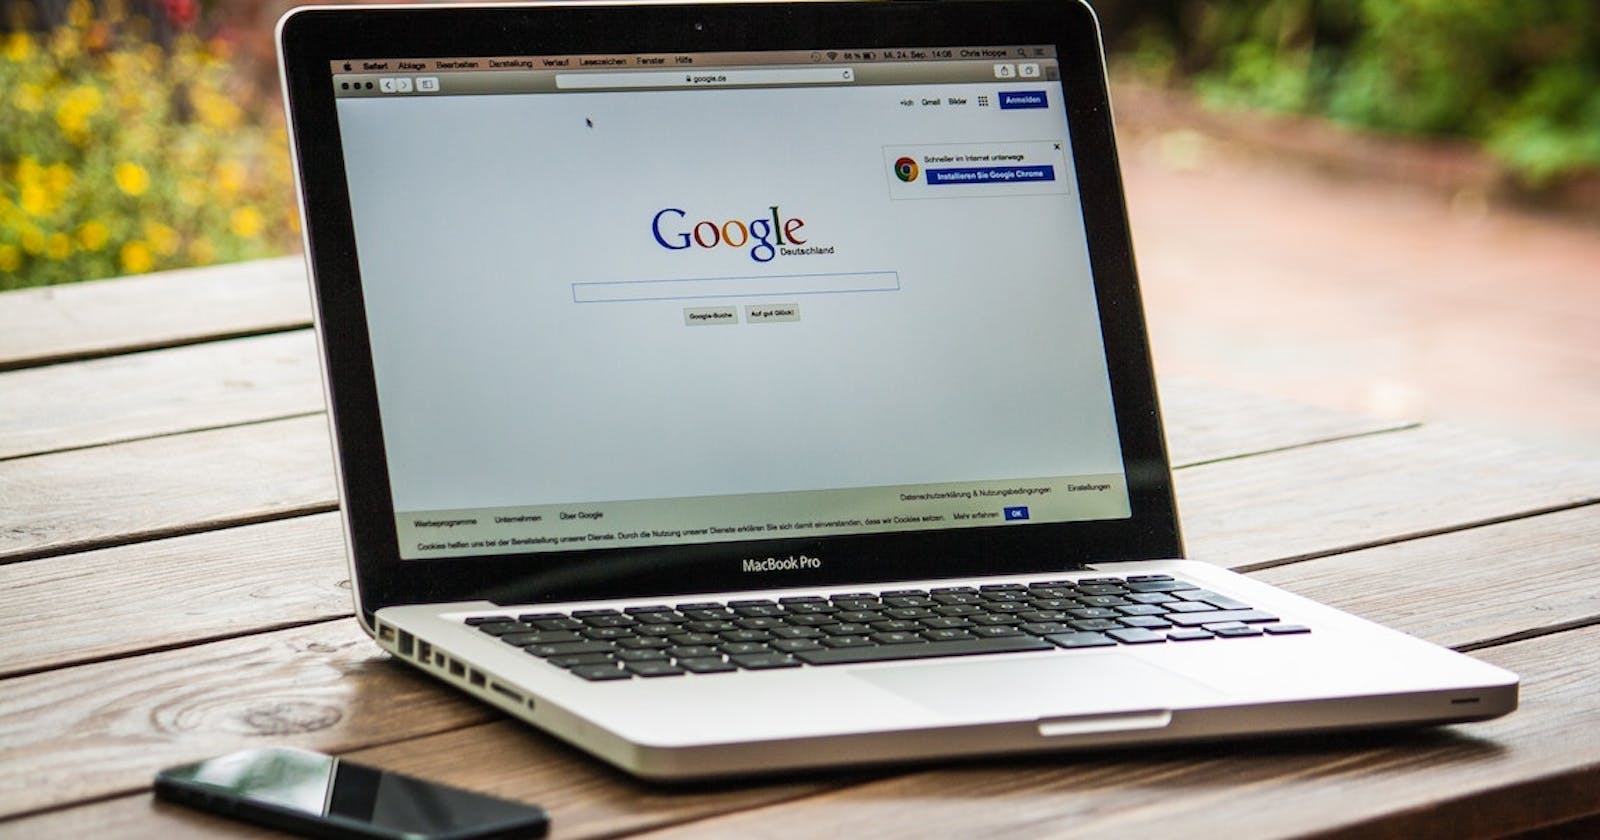 Google Search Now Has Grammar Checker-How to Use it